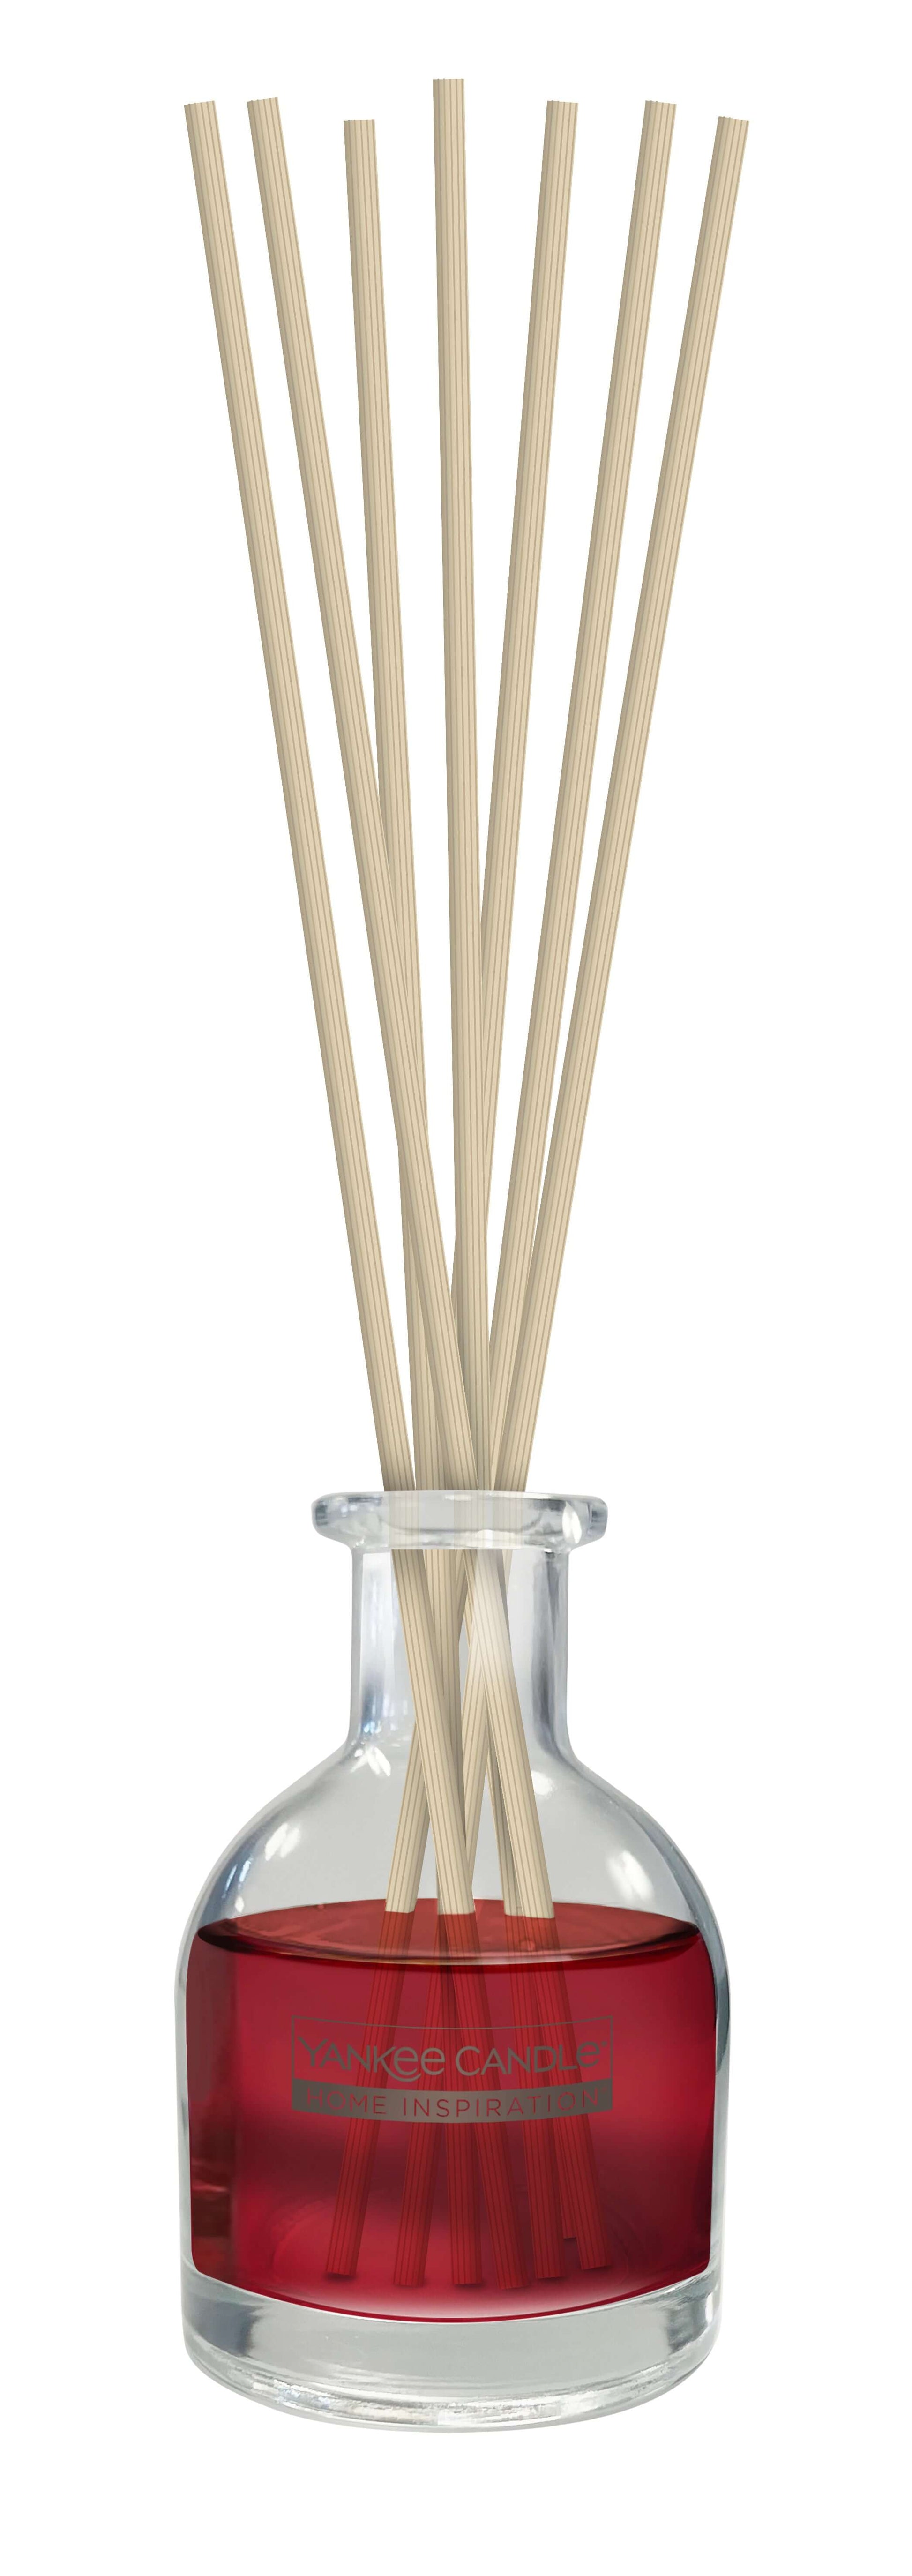 Cherry Vanilla Reed Diffuser Fill your home with the sweet, sharp fragrance of Cherry Vanilla from Yankee Candle® Home Inspiration®. 